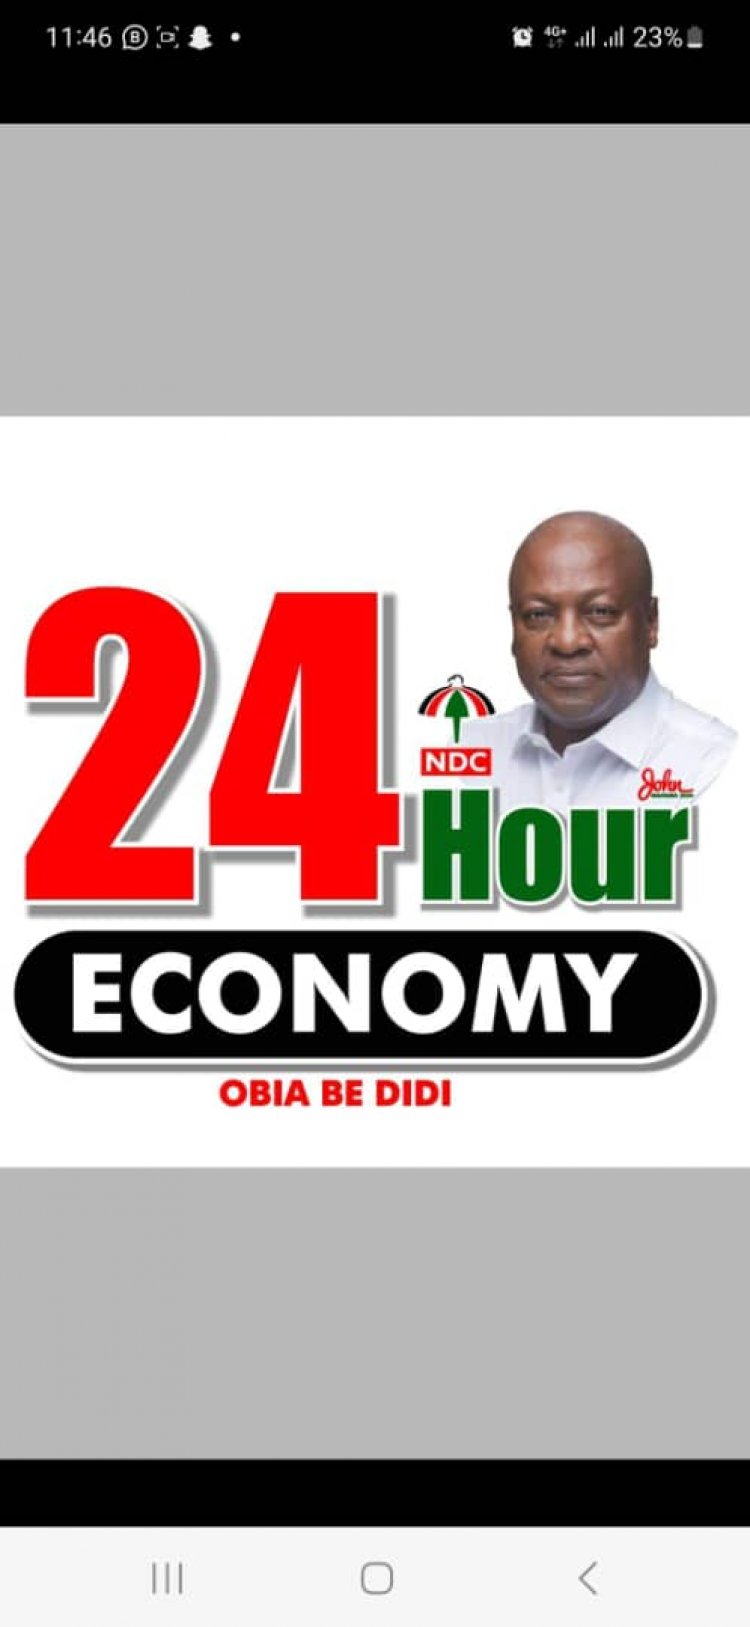 We Will Vote For Mahama To Win 2024 Polls To Implement His 24-Hour Mega Economy Policy —1000s Of Transport Operators Declares Support